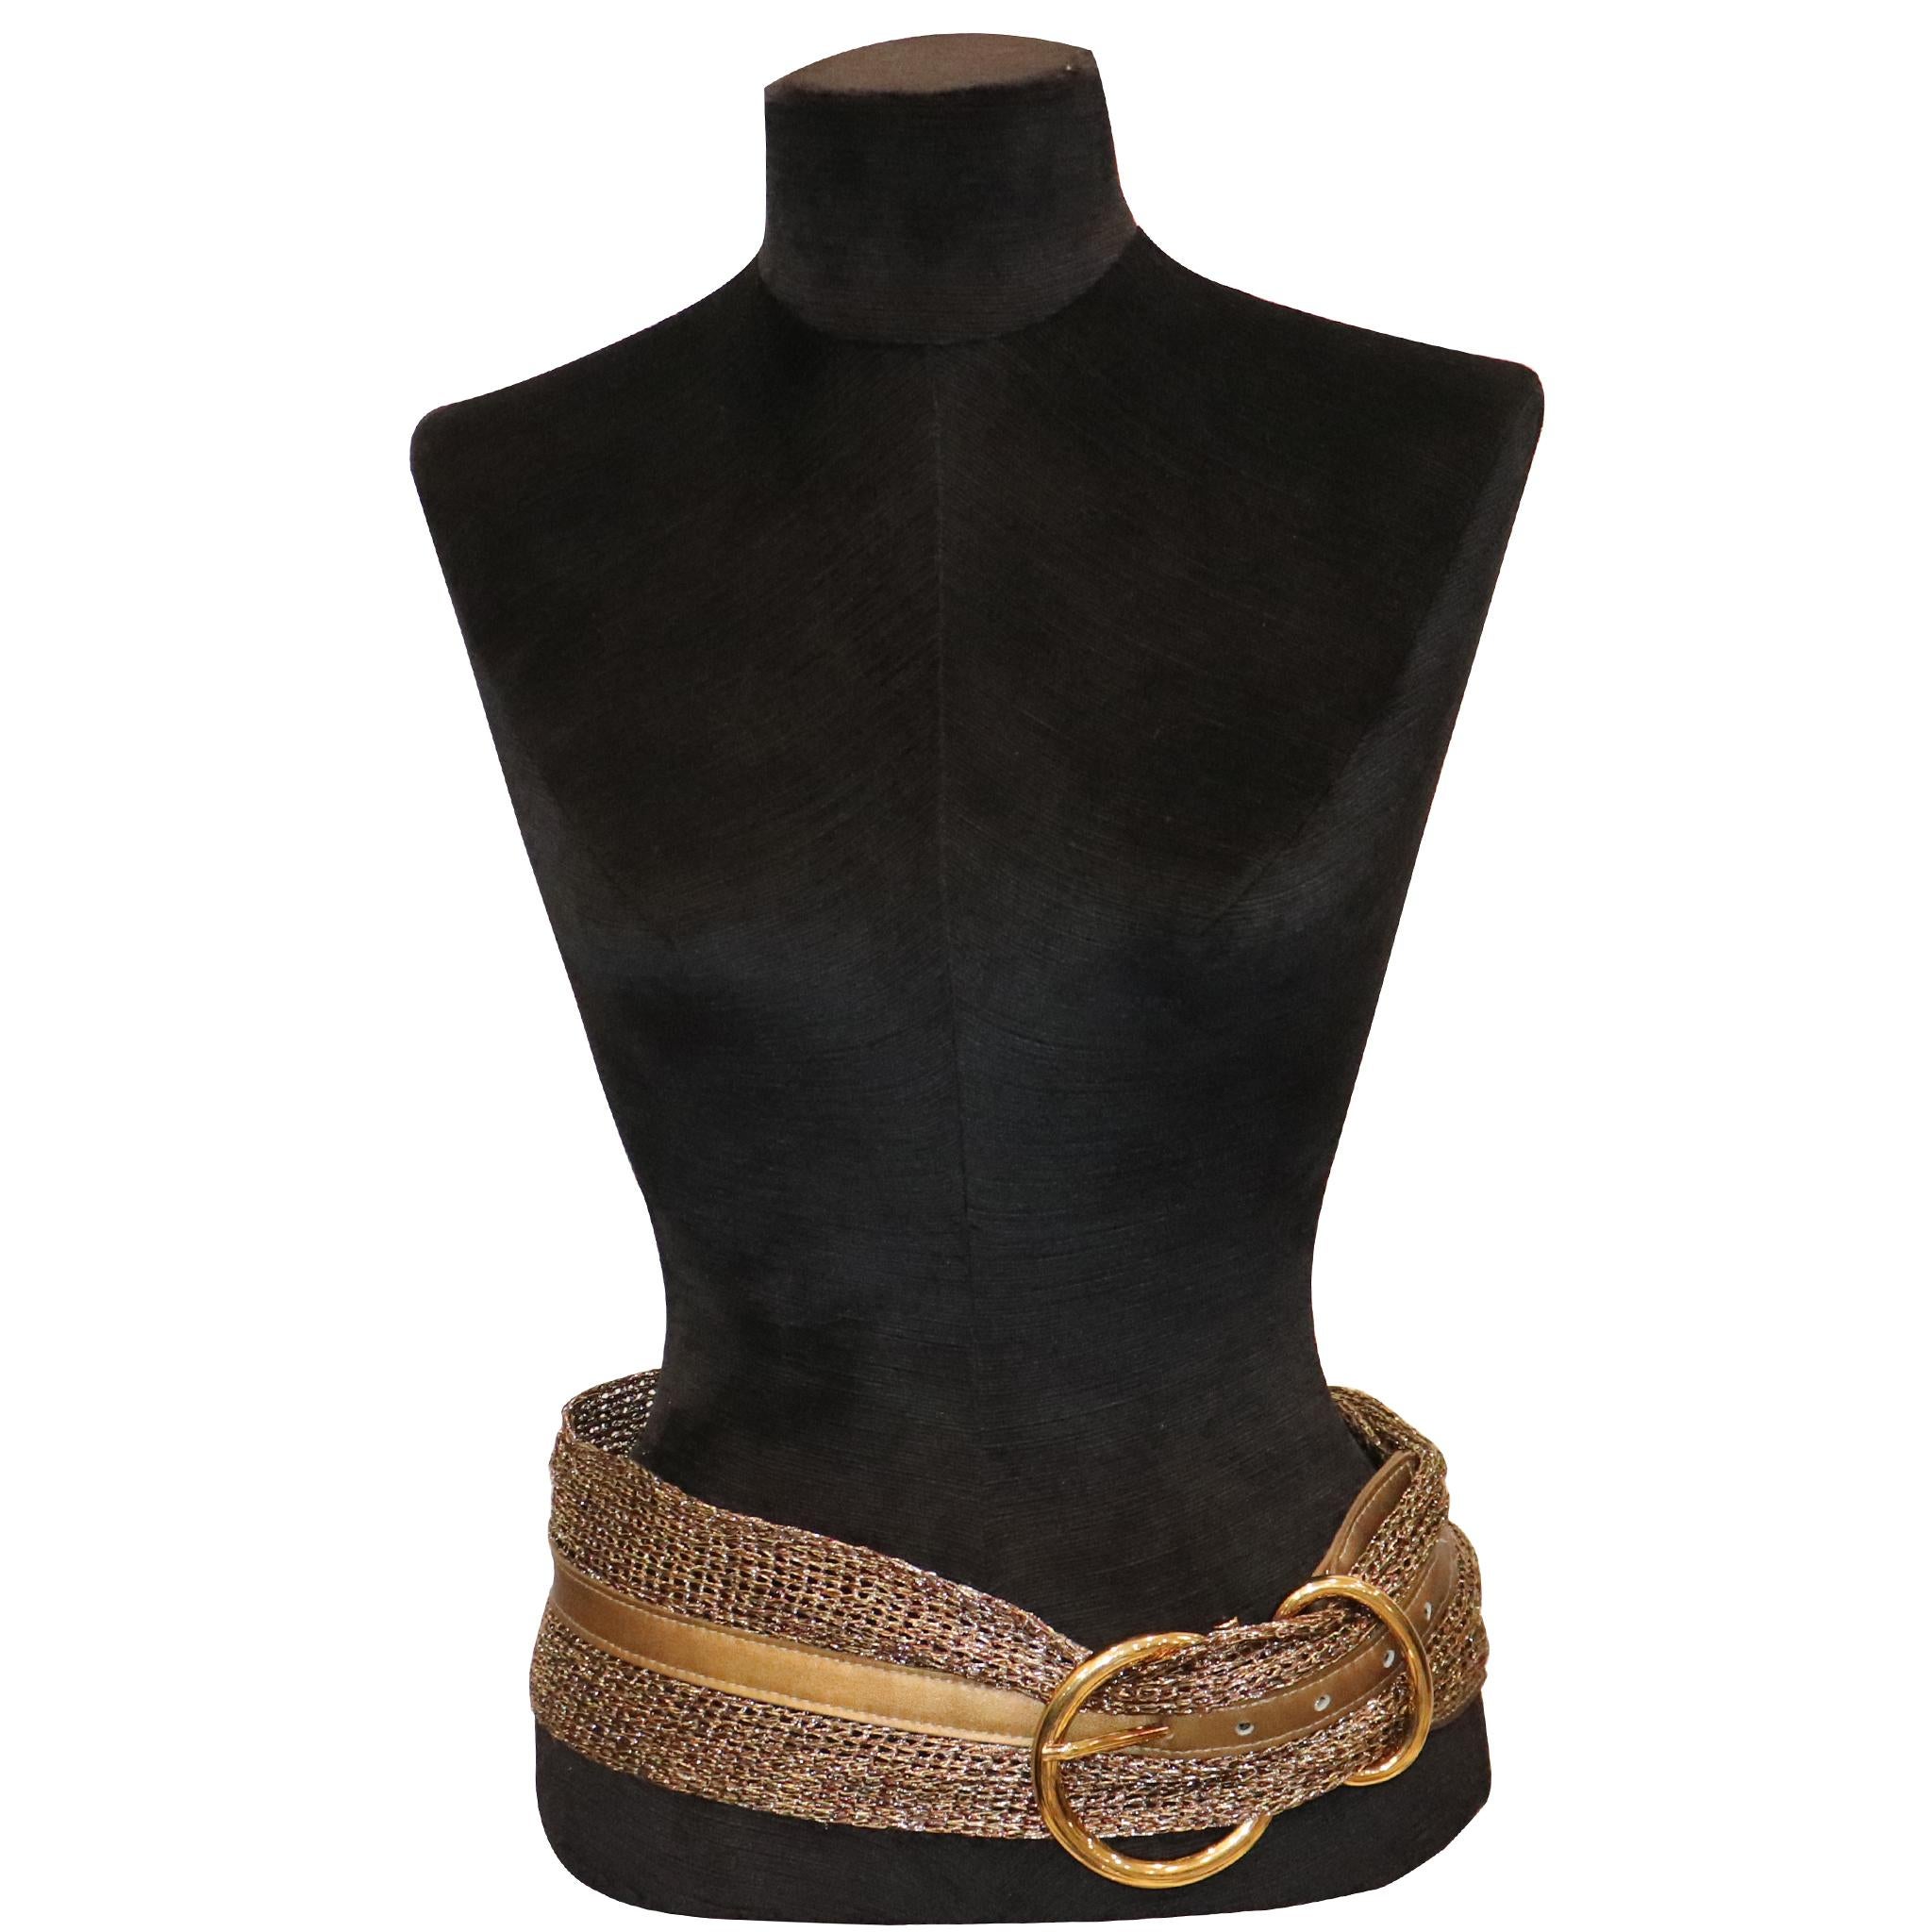 Ribel Gold Mesh Belt W/ Gold Looped Buckle. In excellent condition 

Measurements:

Longest length - 36.25 inches
Shortest length - 31 inches
Width - 4 inches